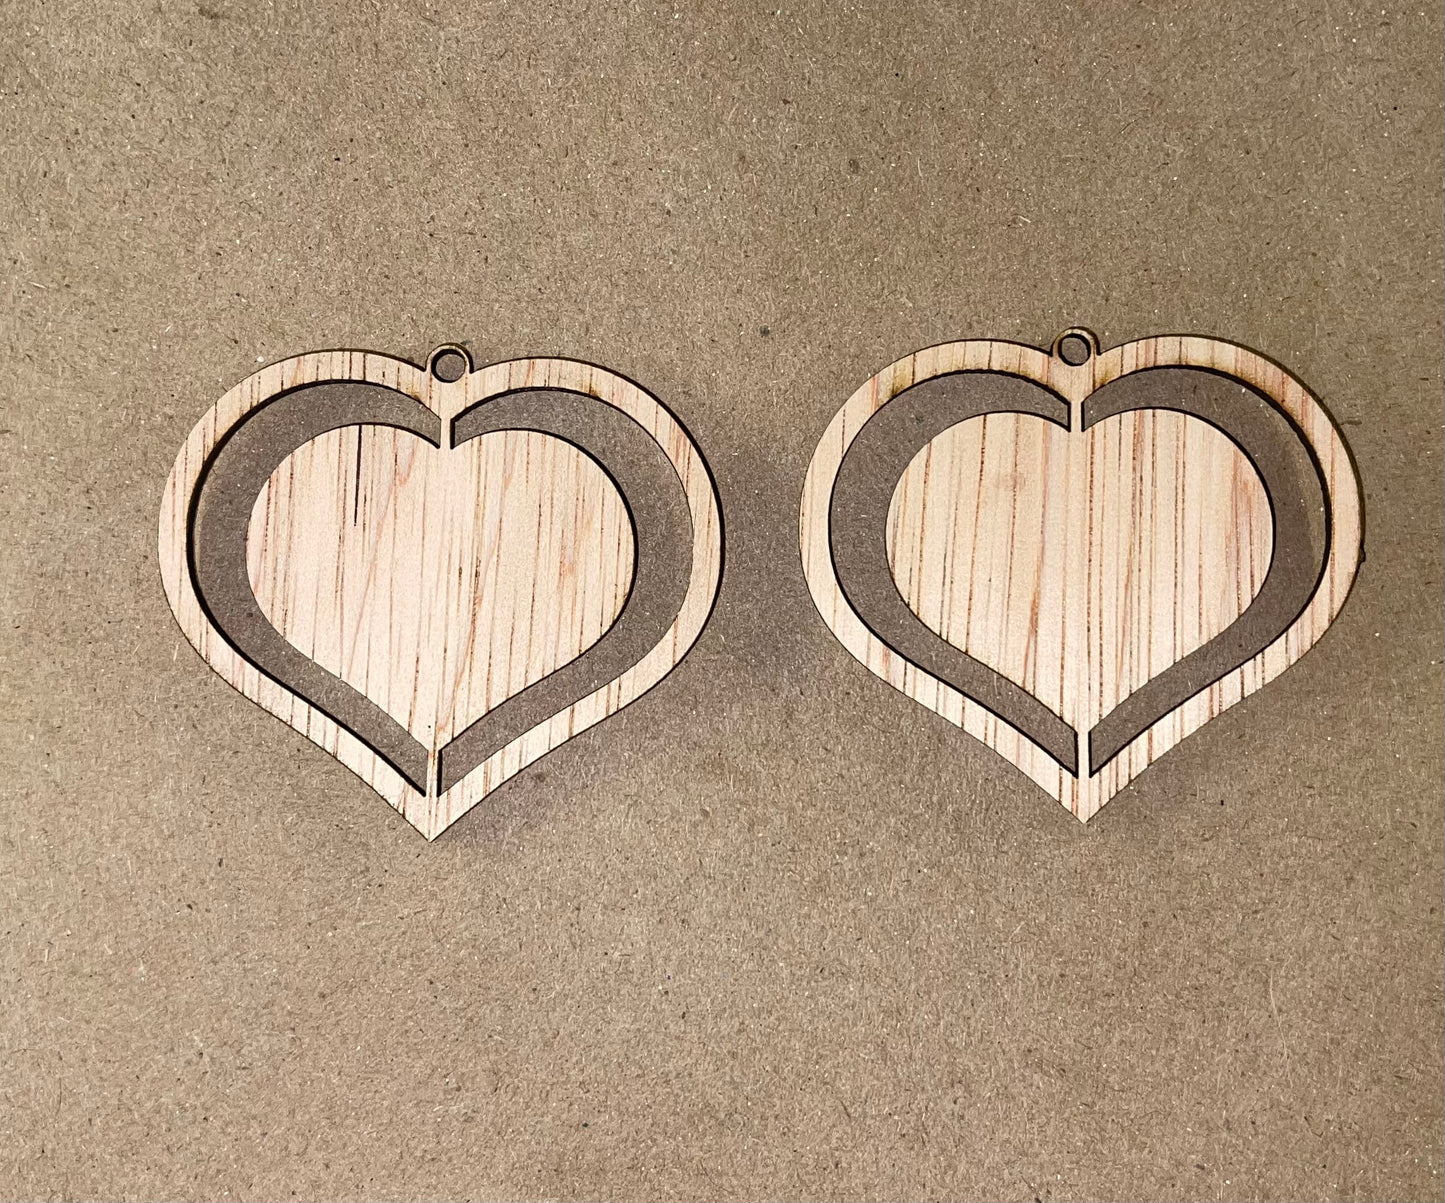 Heart Outline with Large Heart Cutout Blank Wood Earrings. DIY jewelry. Unfinished laser cut wood jewelry. Wood earring blanks. Unfinished wood earrings. Wood jewelry blanks.